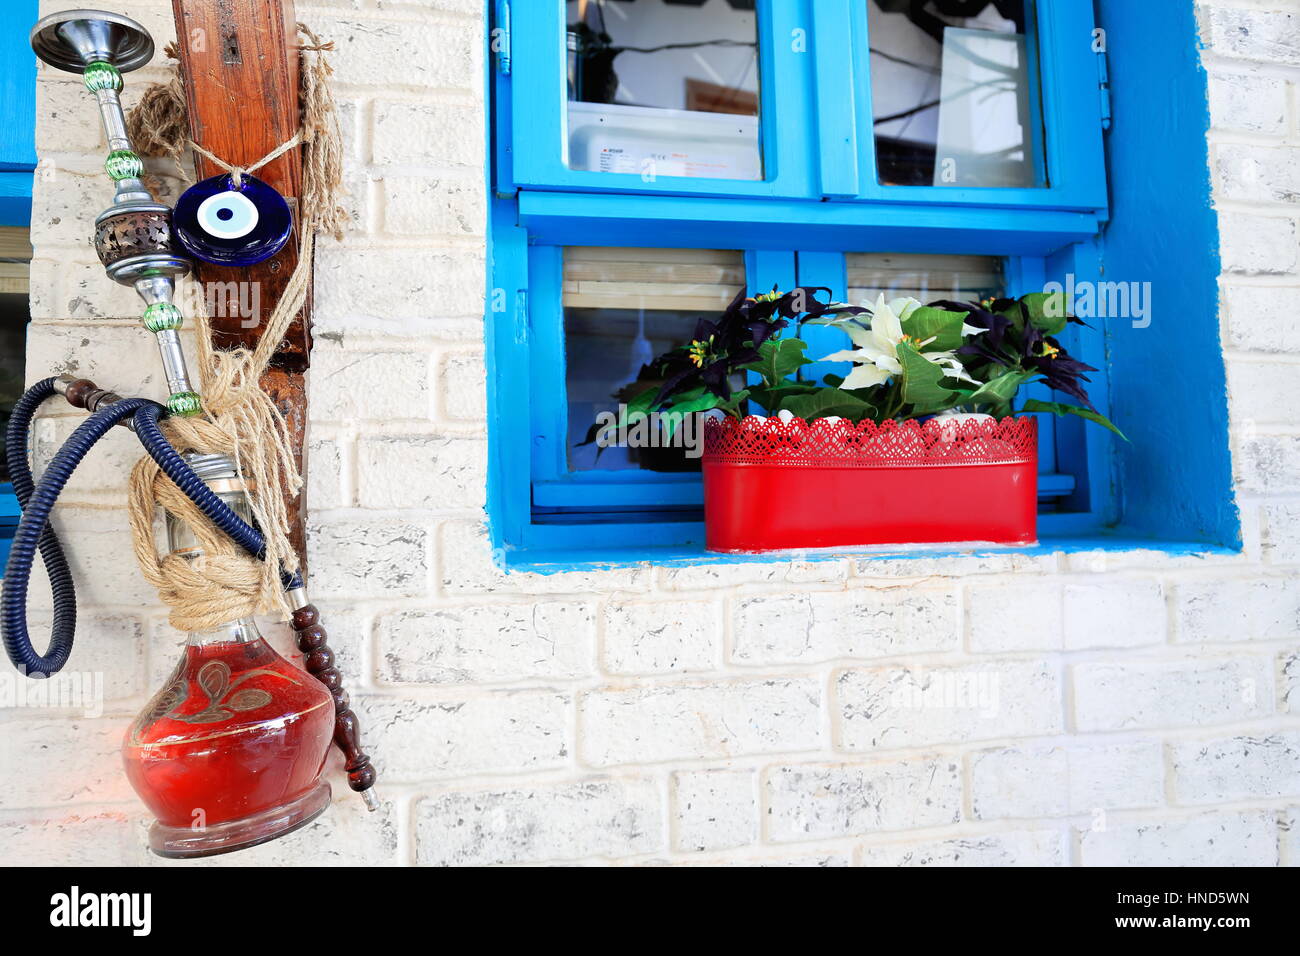 Old hookah-shisha-narghile-waterpipe with nazar-blue bead amulet hanging on the whitewashed wall of a house with blue window and red plantpot-street o Stock Photo